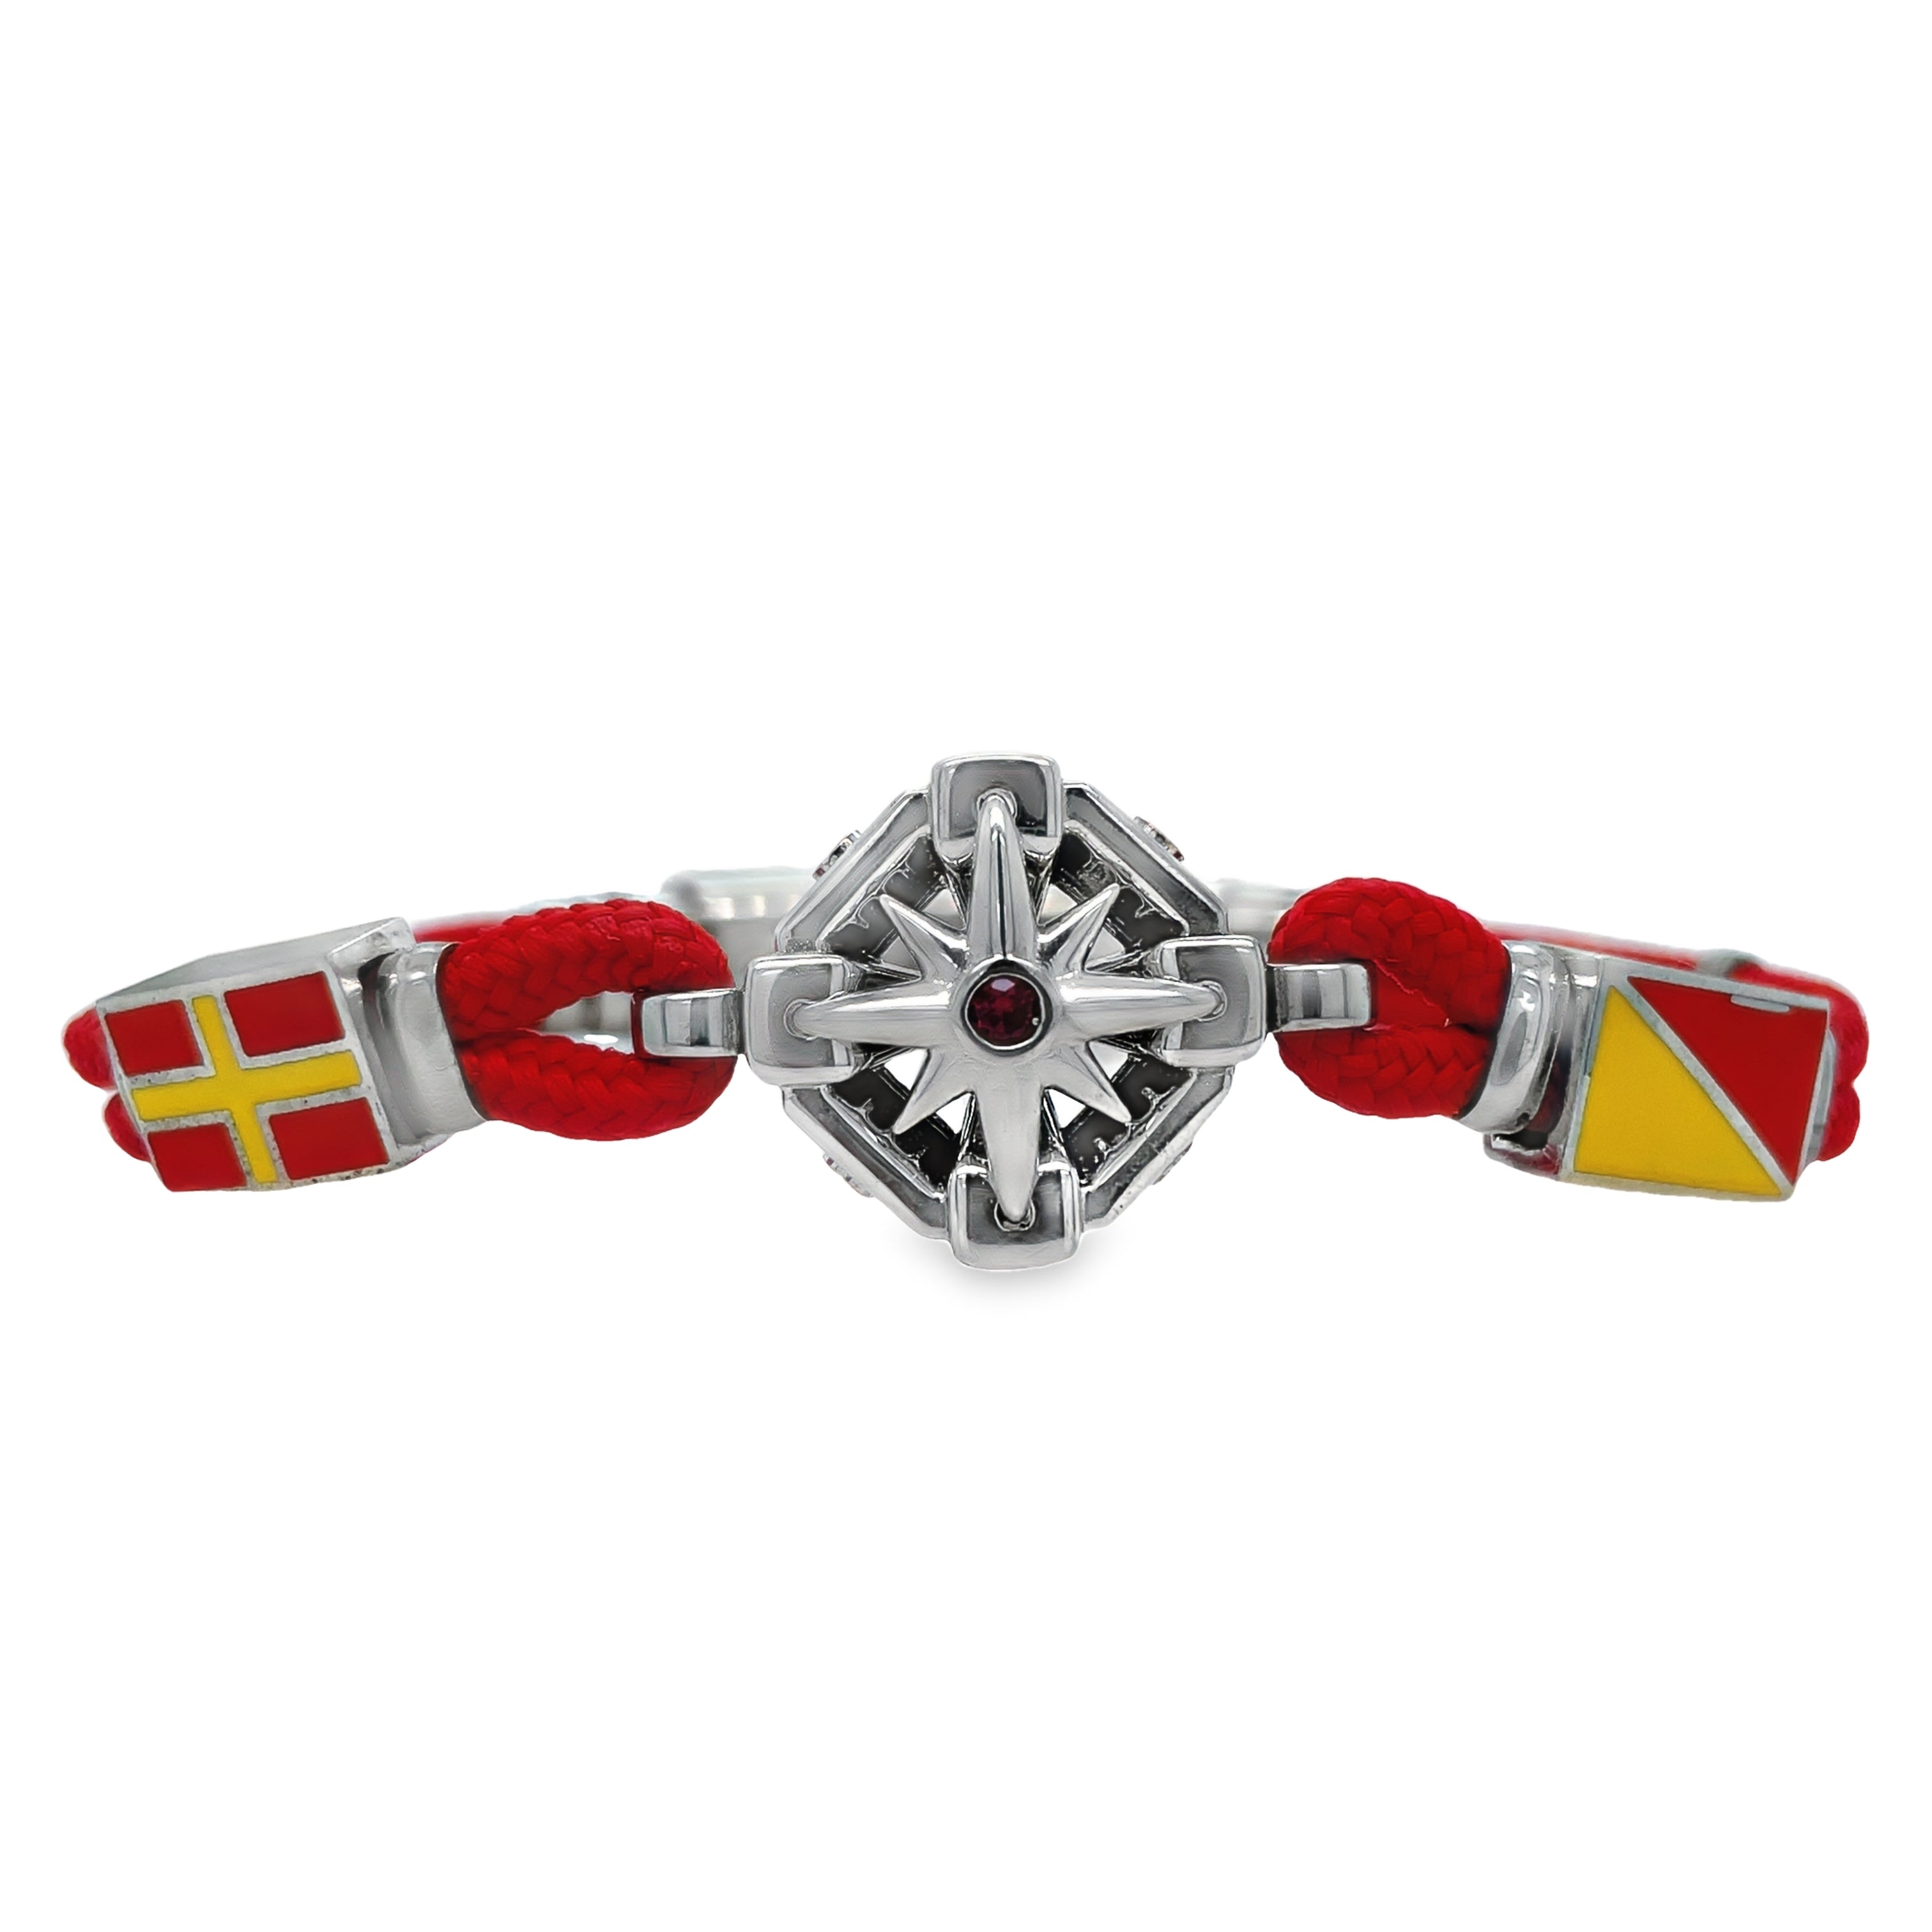 This Italian-made sterling silver bracelet features a sterling compass rose, coated in rhodium for durability. The adjustable slide lock and red cord add versatility to the 8" length. Elevate your accessory game with this sleek and stylish piece.